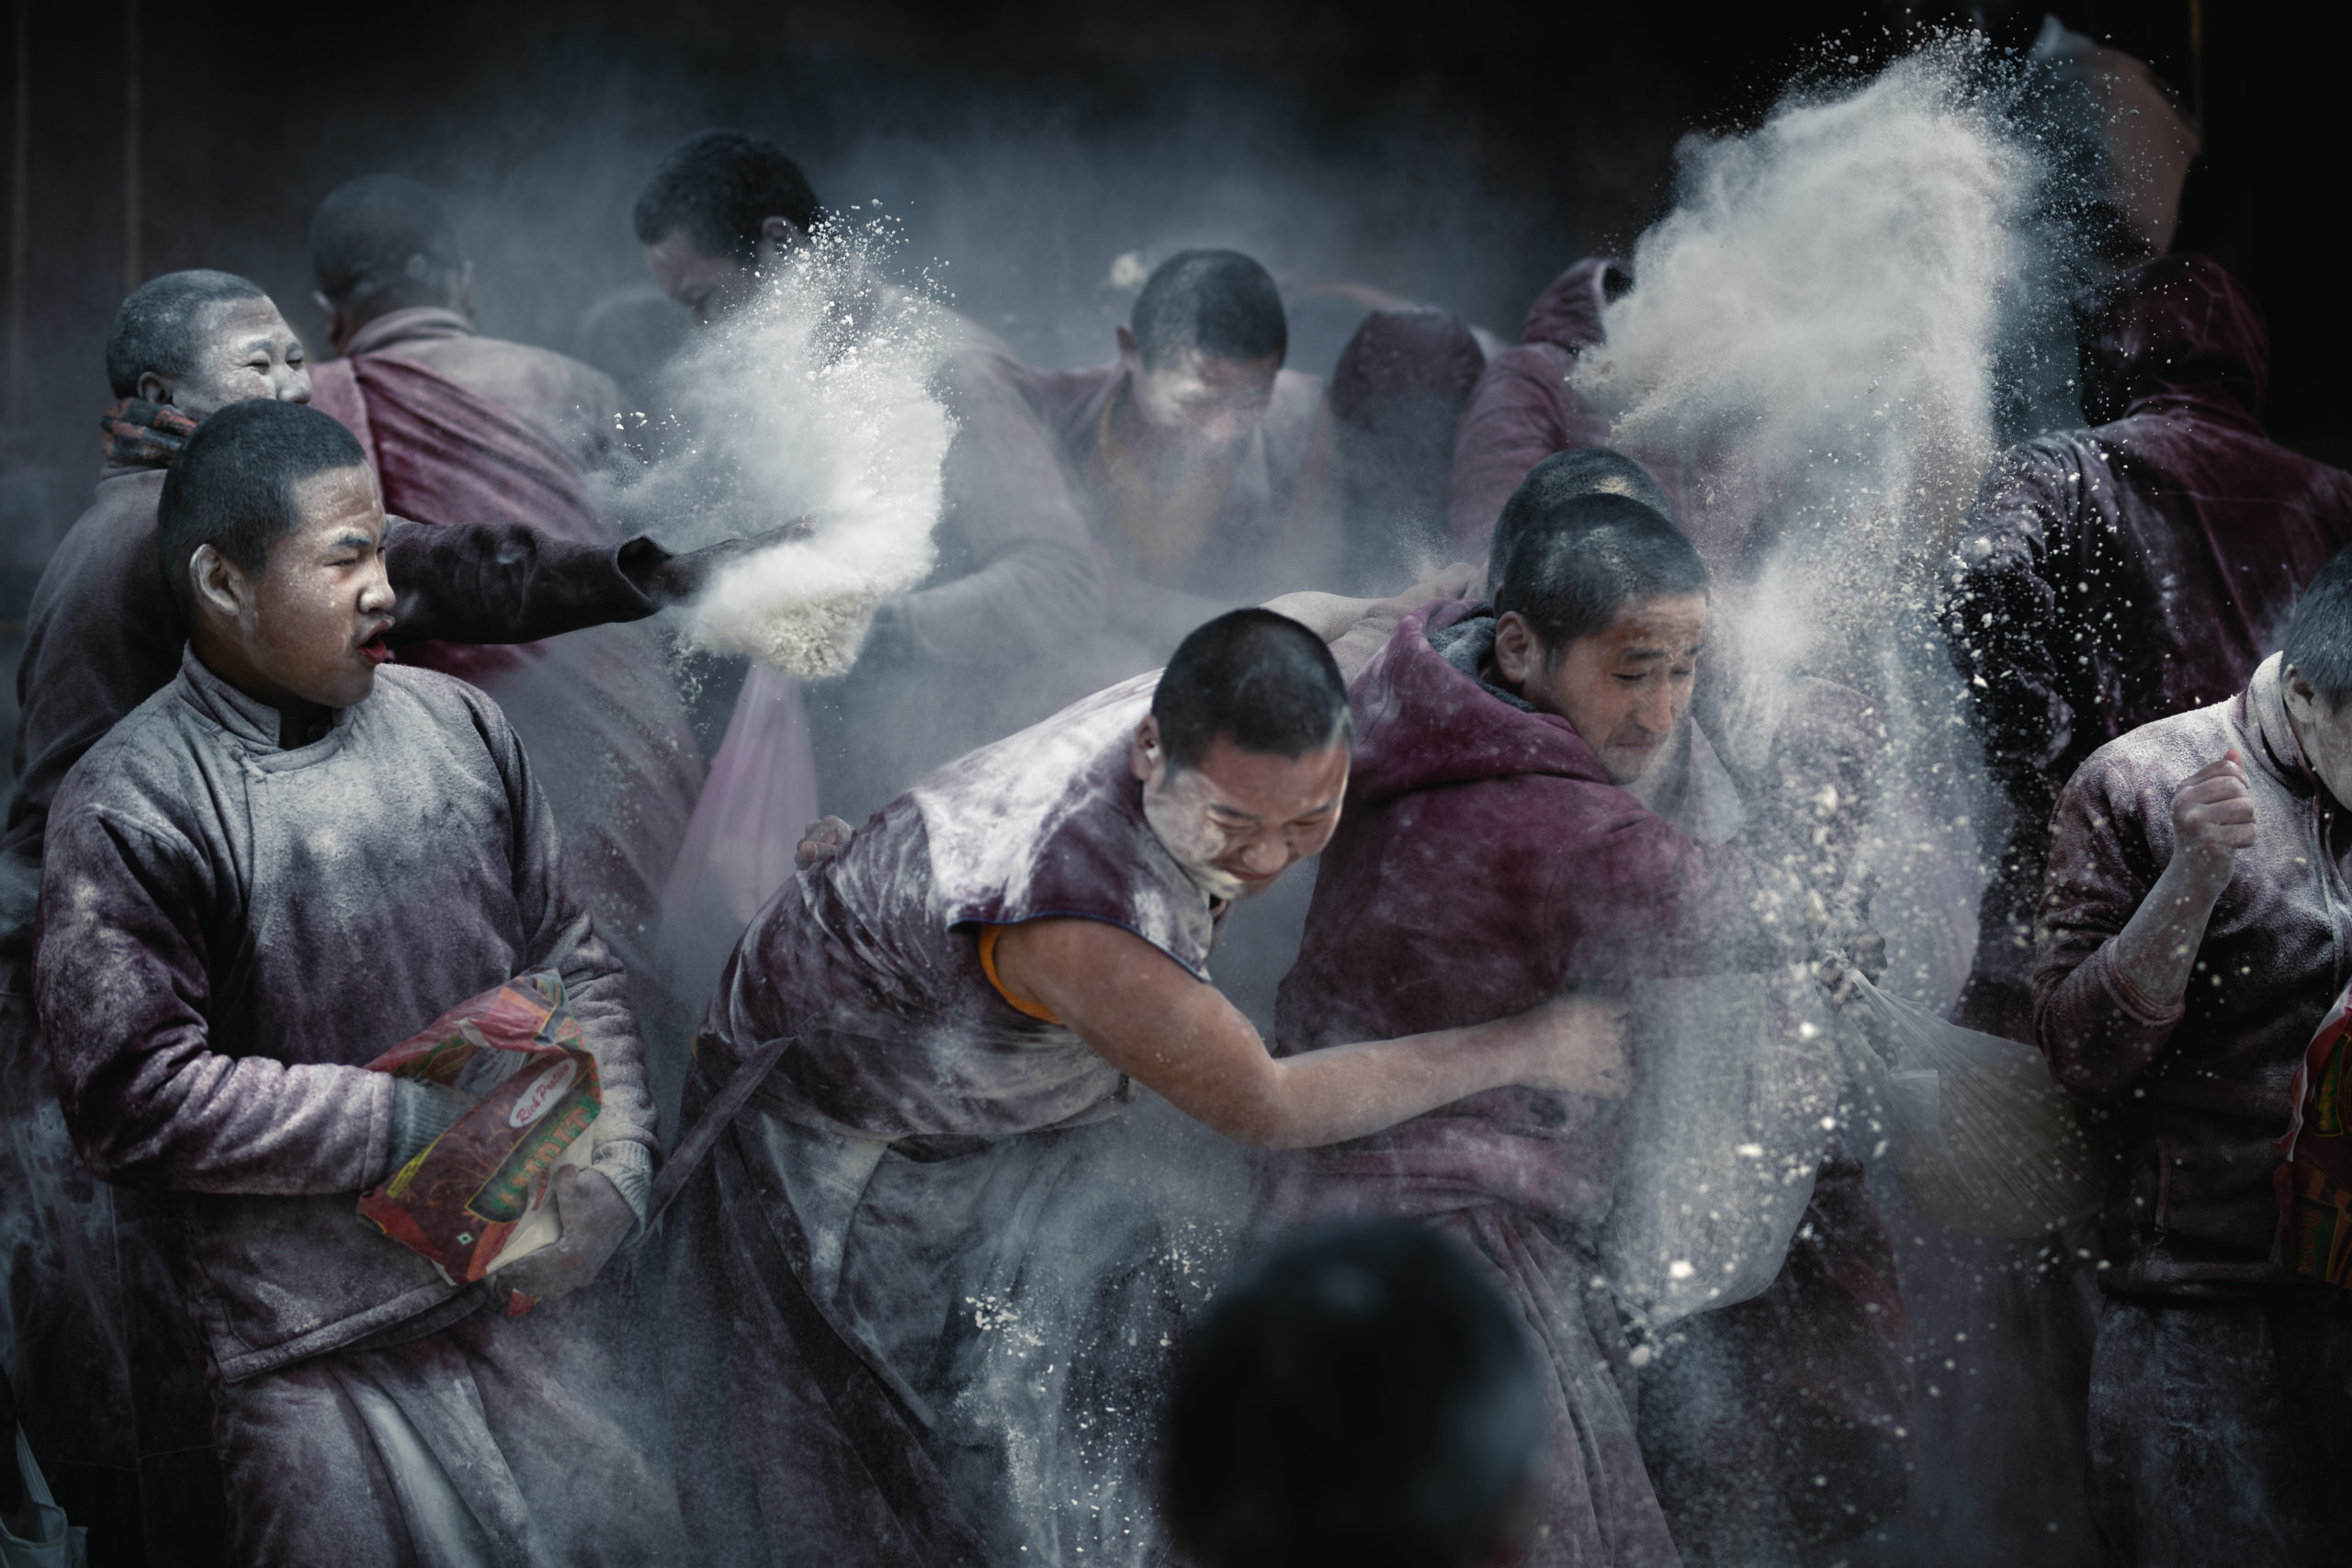 Photography of young Buddhist monks celebrating the Bhutanese New Year (Losar festival) by throwing powder and flour at each other at a monastery in Bumthang